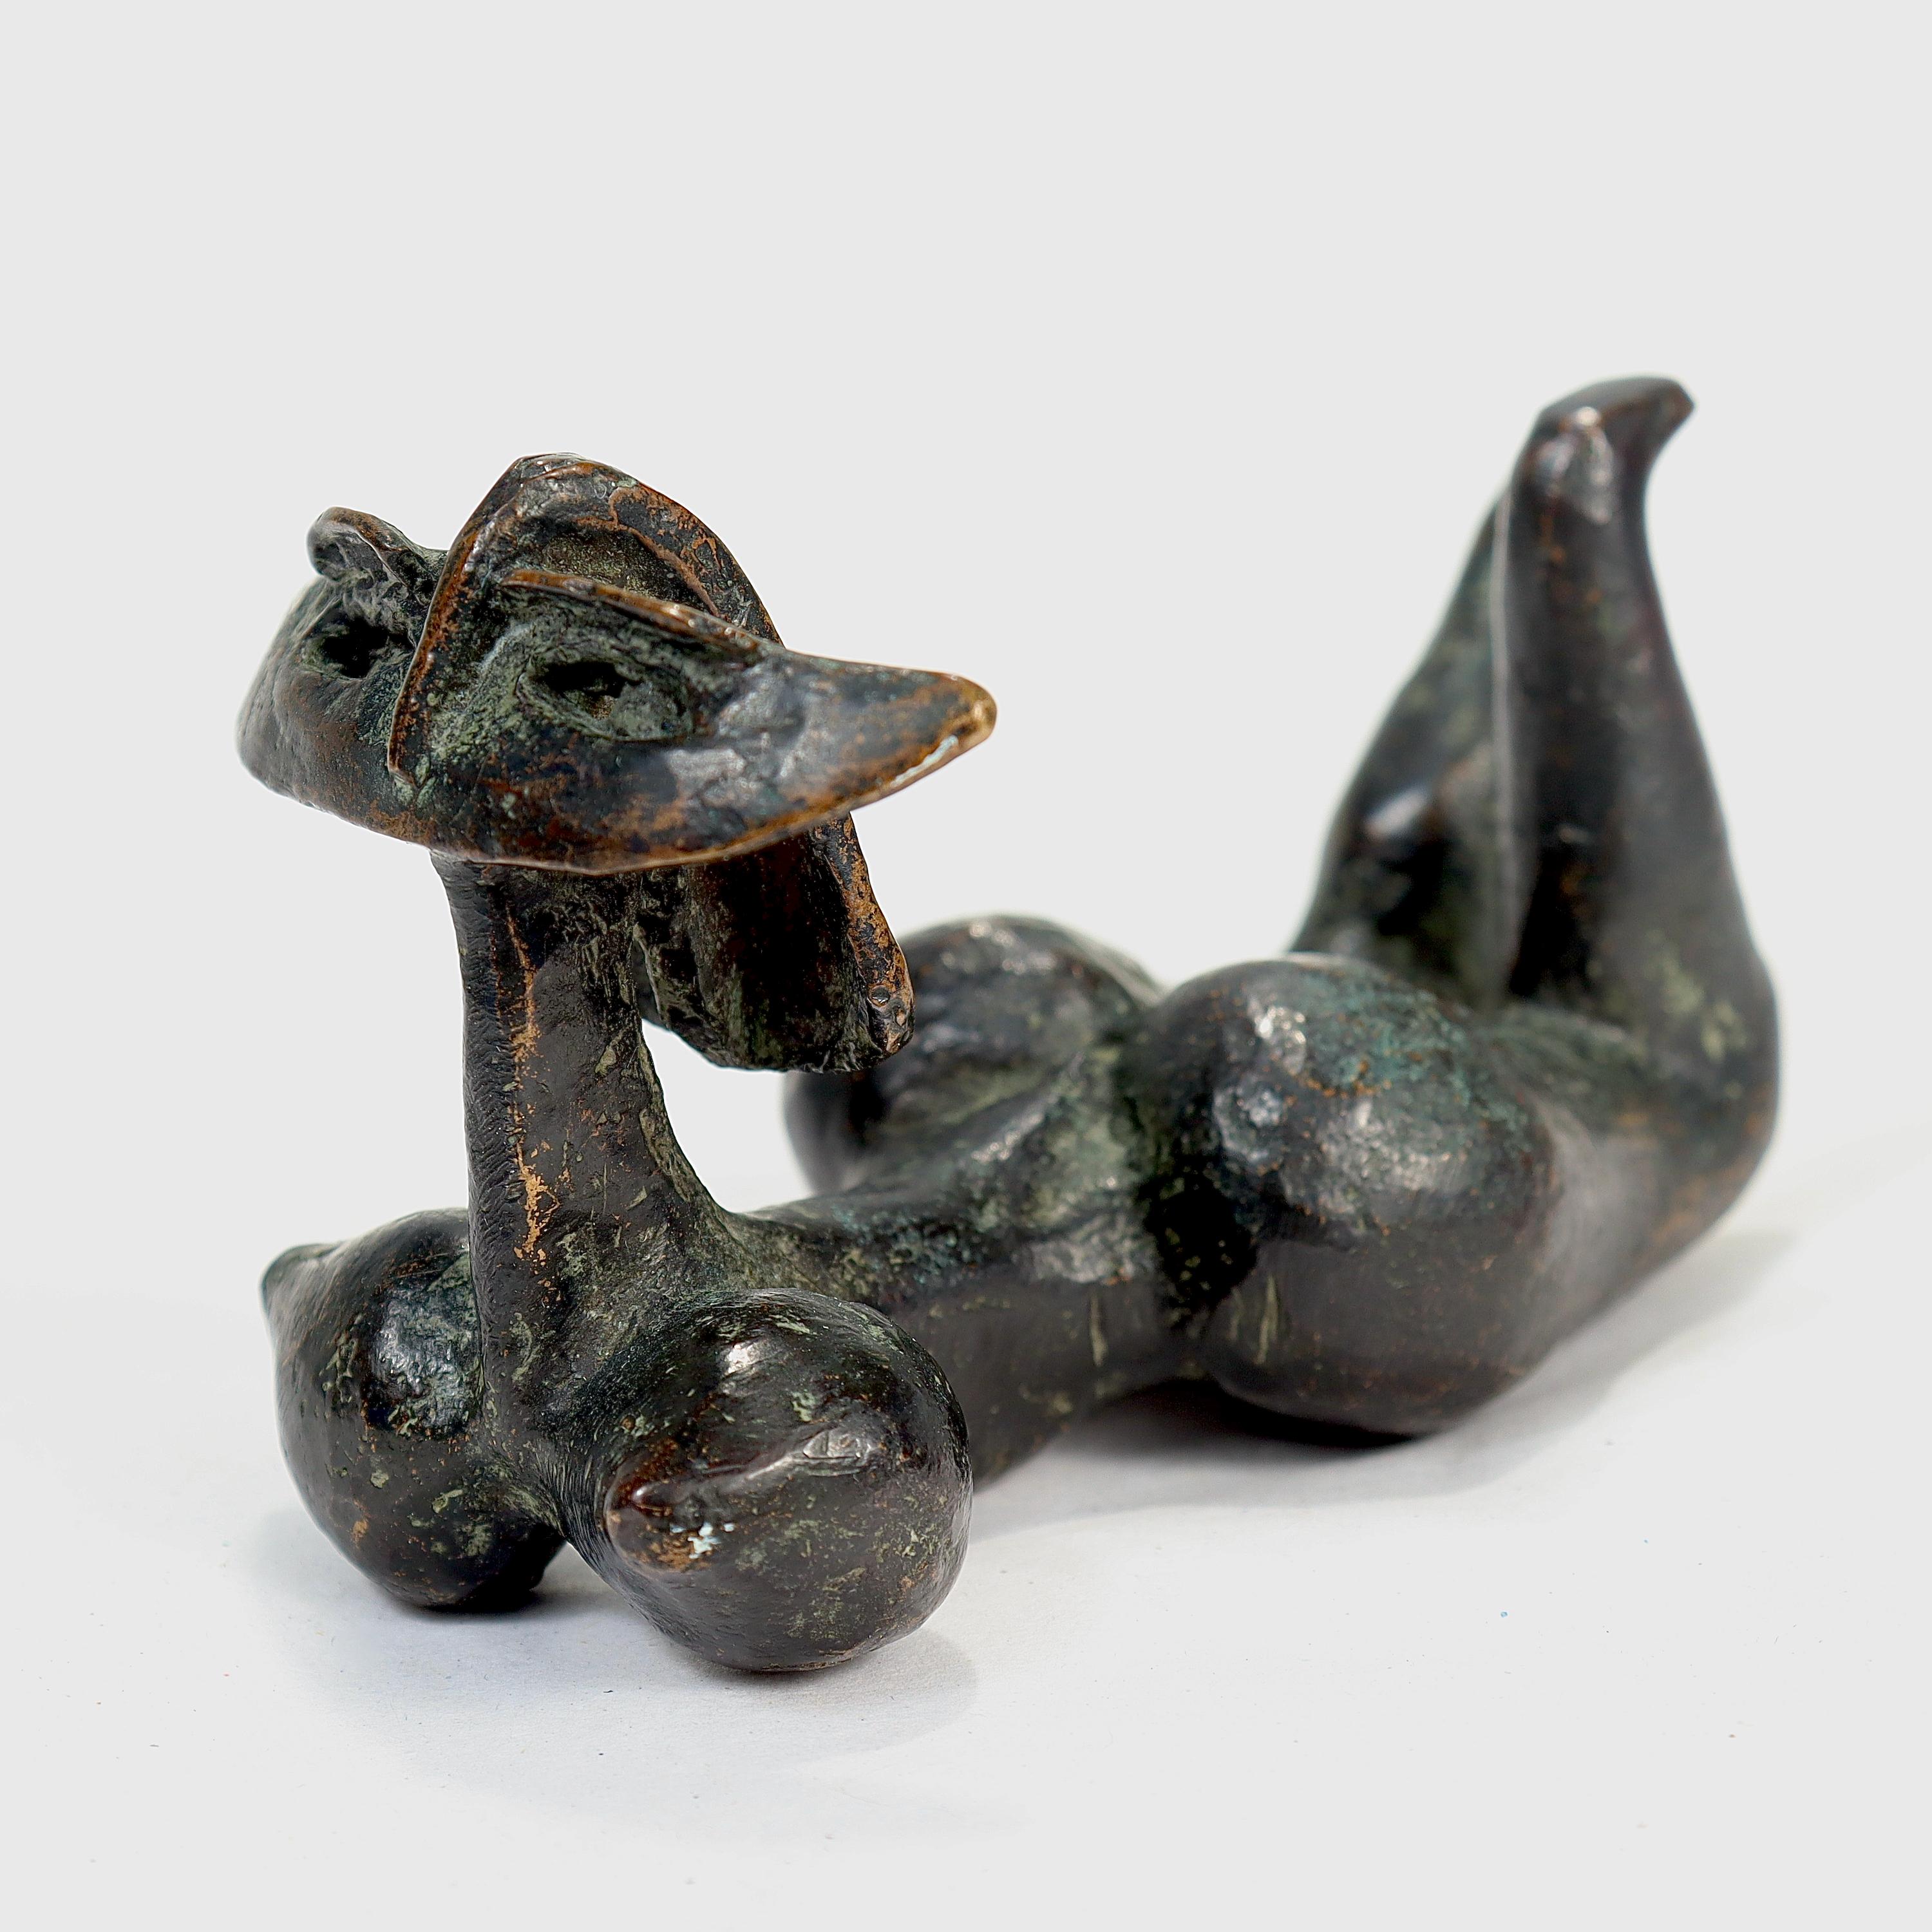 A very fine Surrealist cabinet-sized bronze sculpture.

In the form of a stylized reclining nude female.

Signed to the underside for G. Silva (the South American sculptor, Guillermo Silva). Columbian, (1921 - 2007).

Simply a great bronze